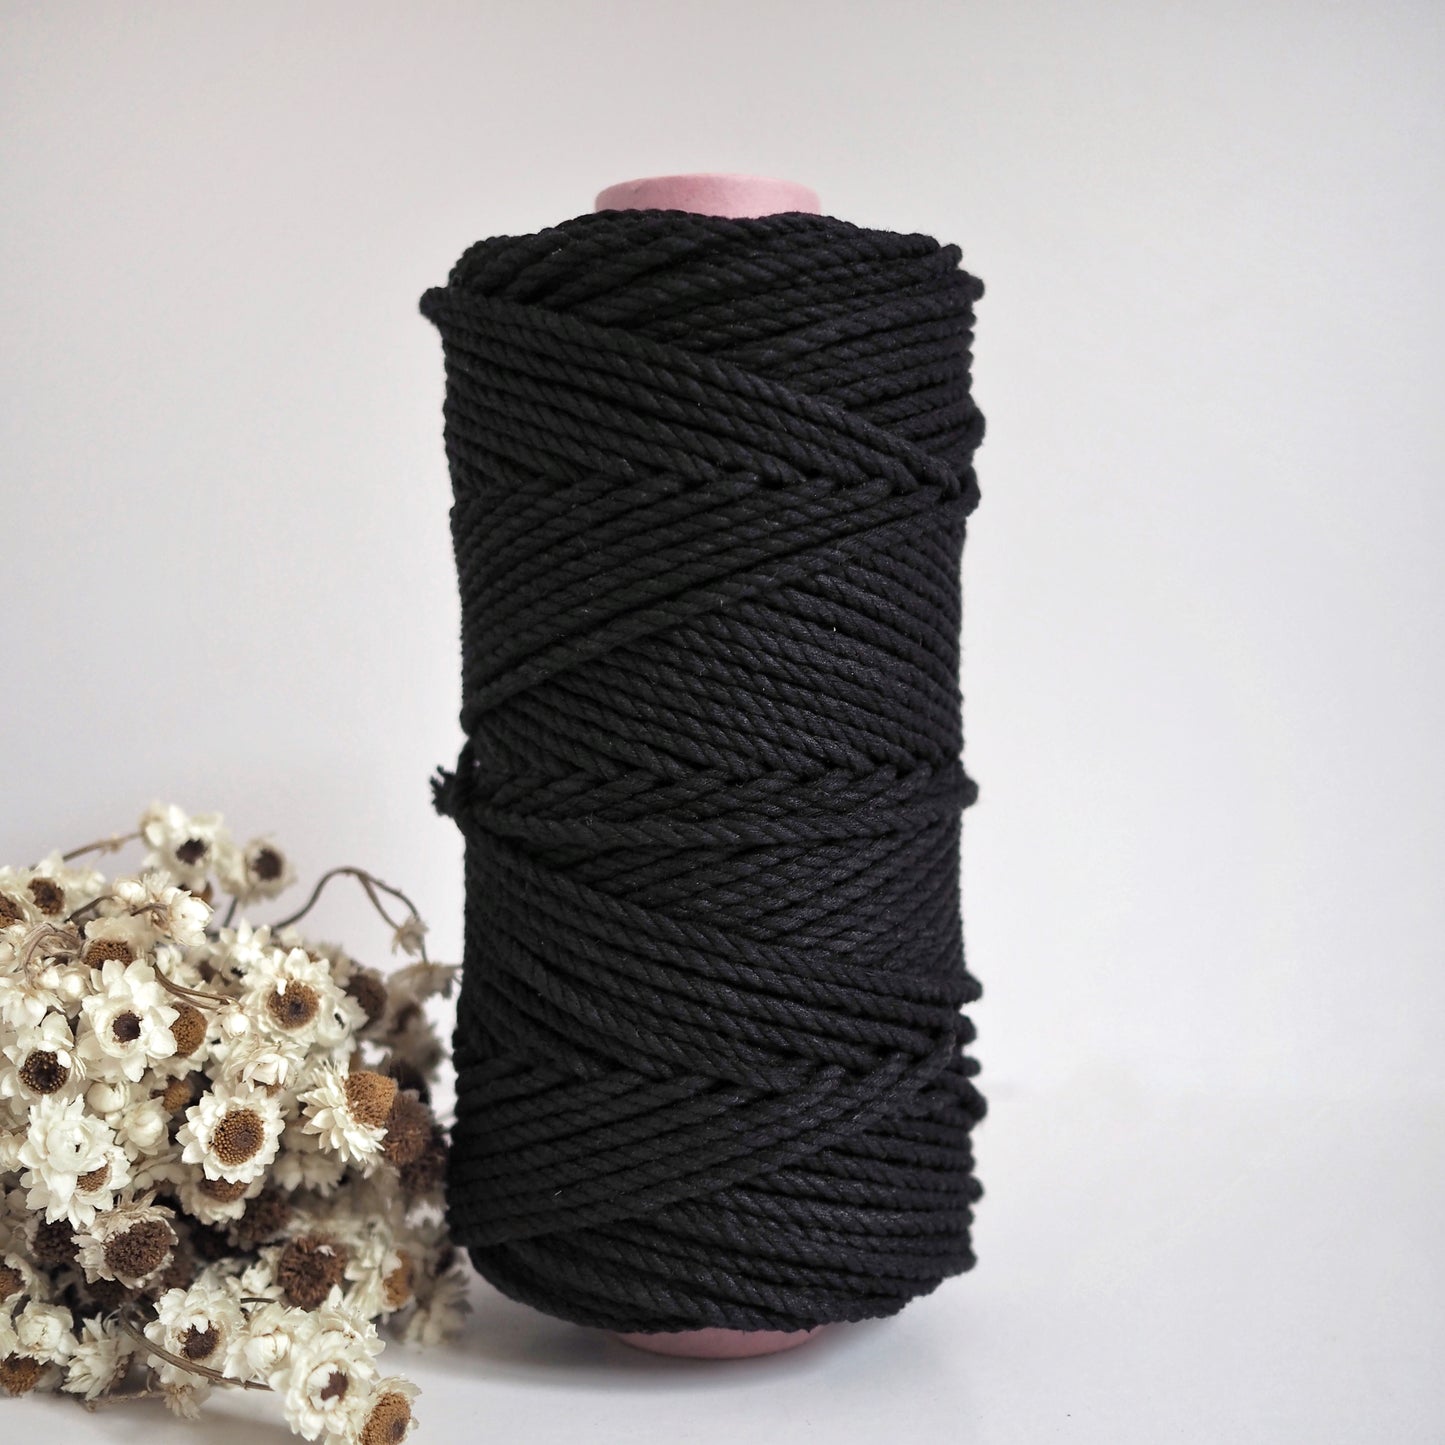 Black | 4mm Recycled Twisted Cotton Rope The Joyful Studio